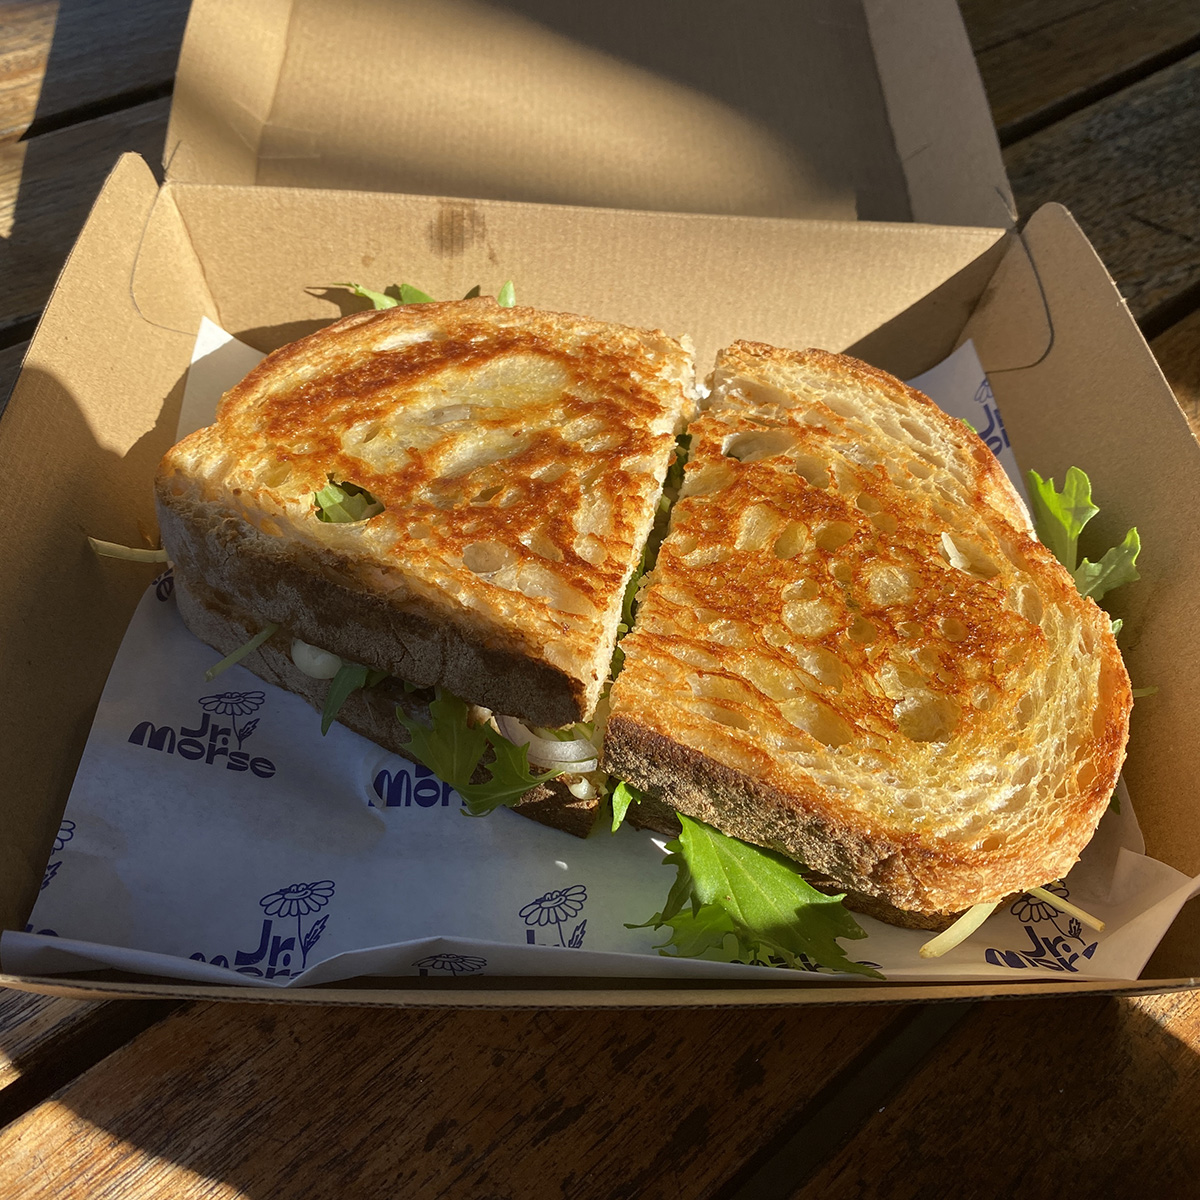 a mushroom and bechamel toastie - with cheese? heuristic decision making examples